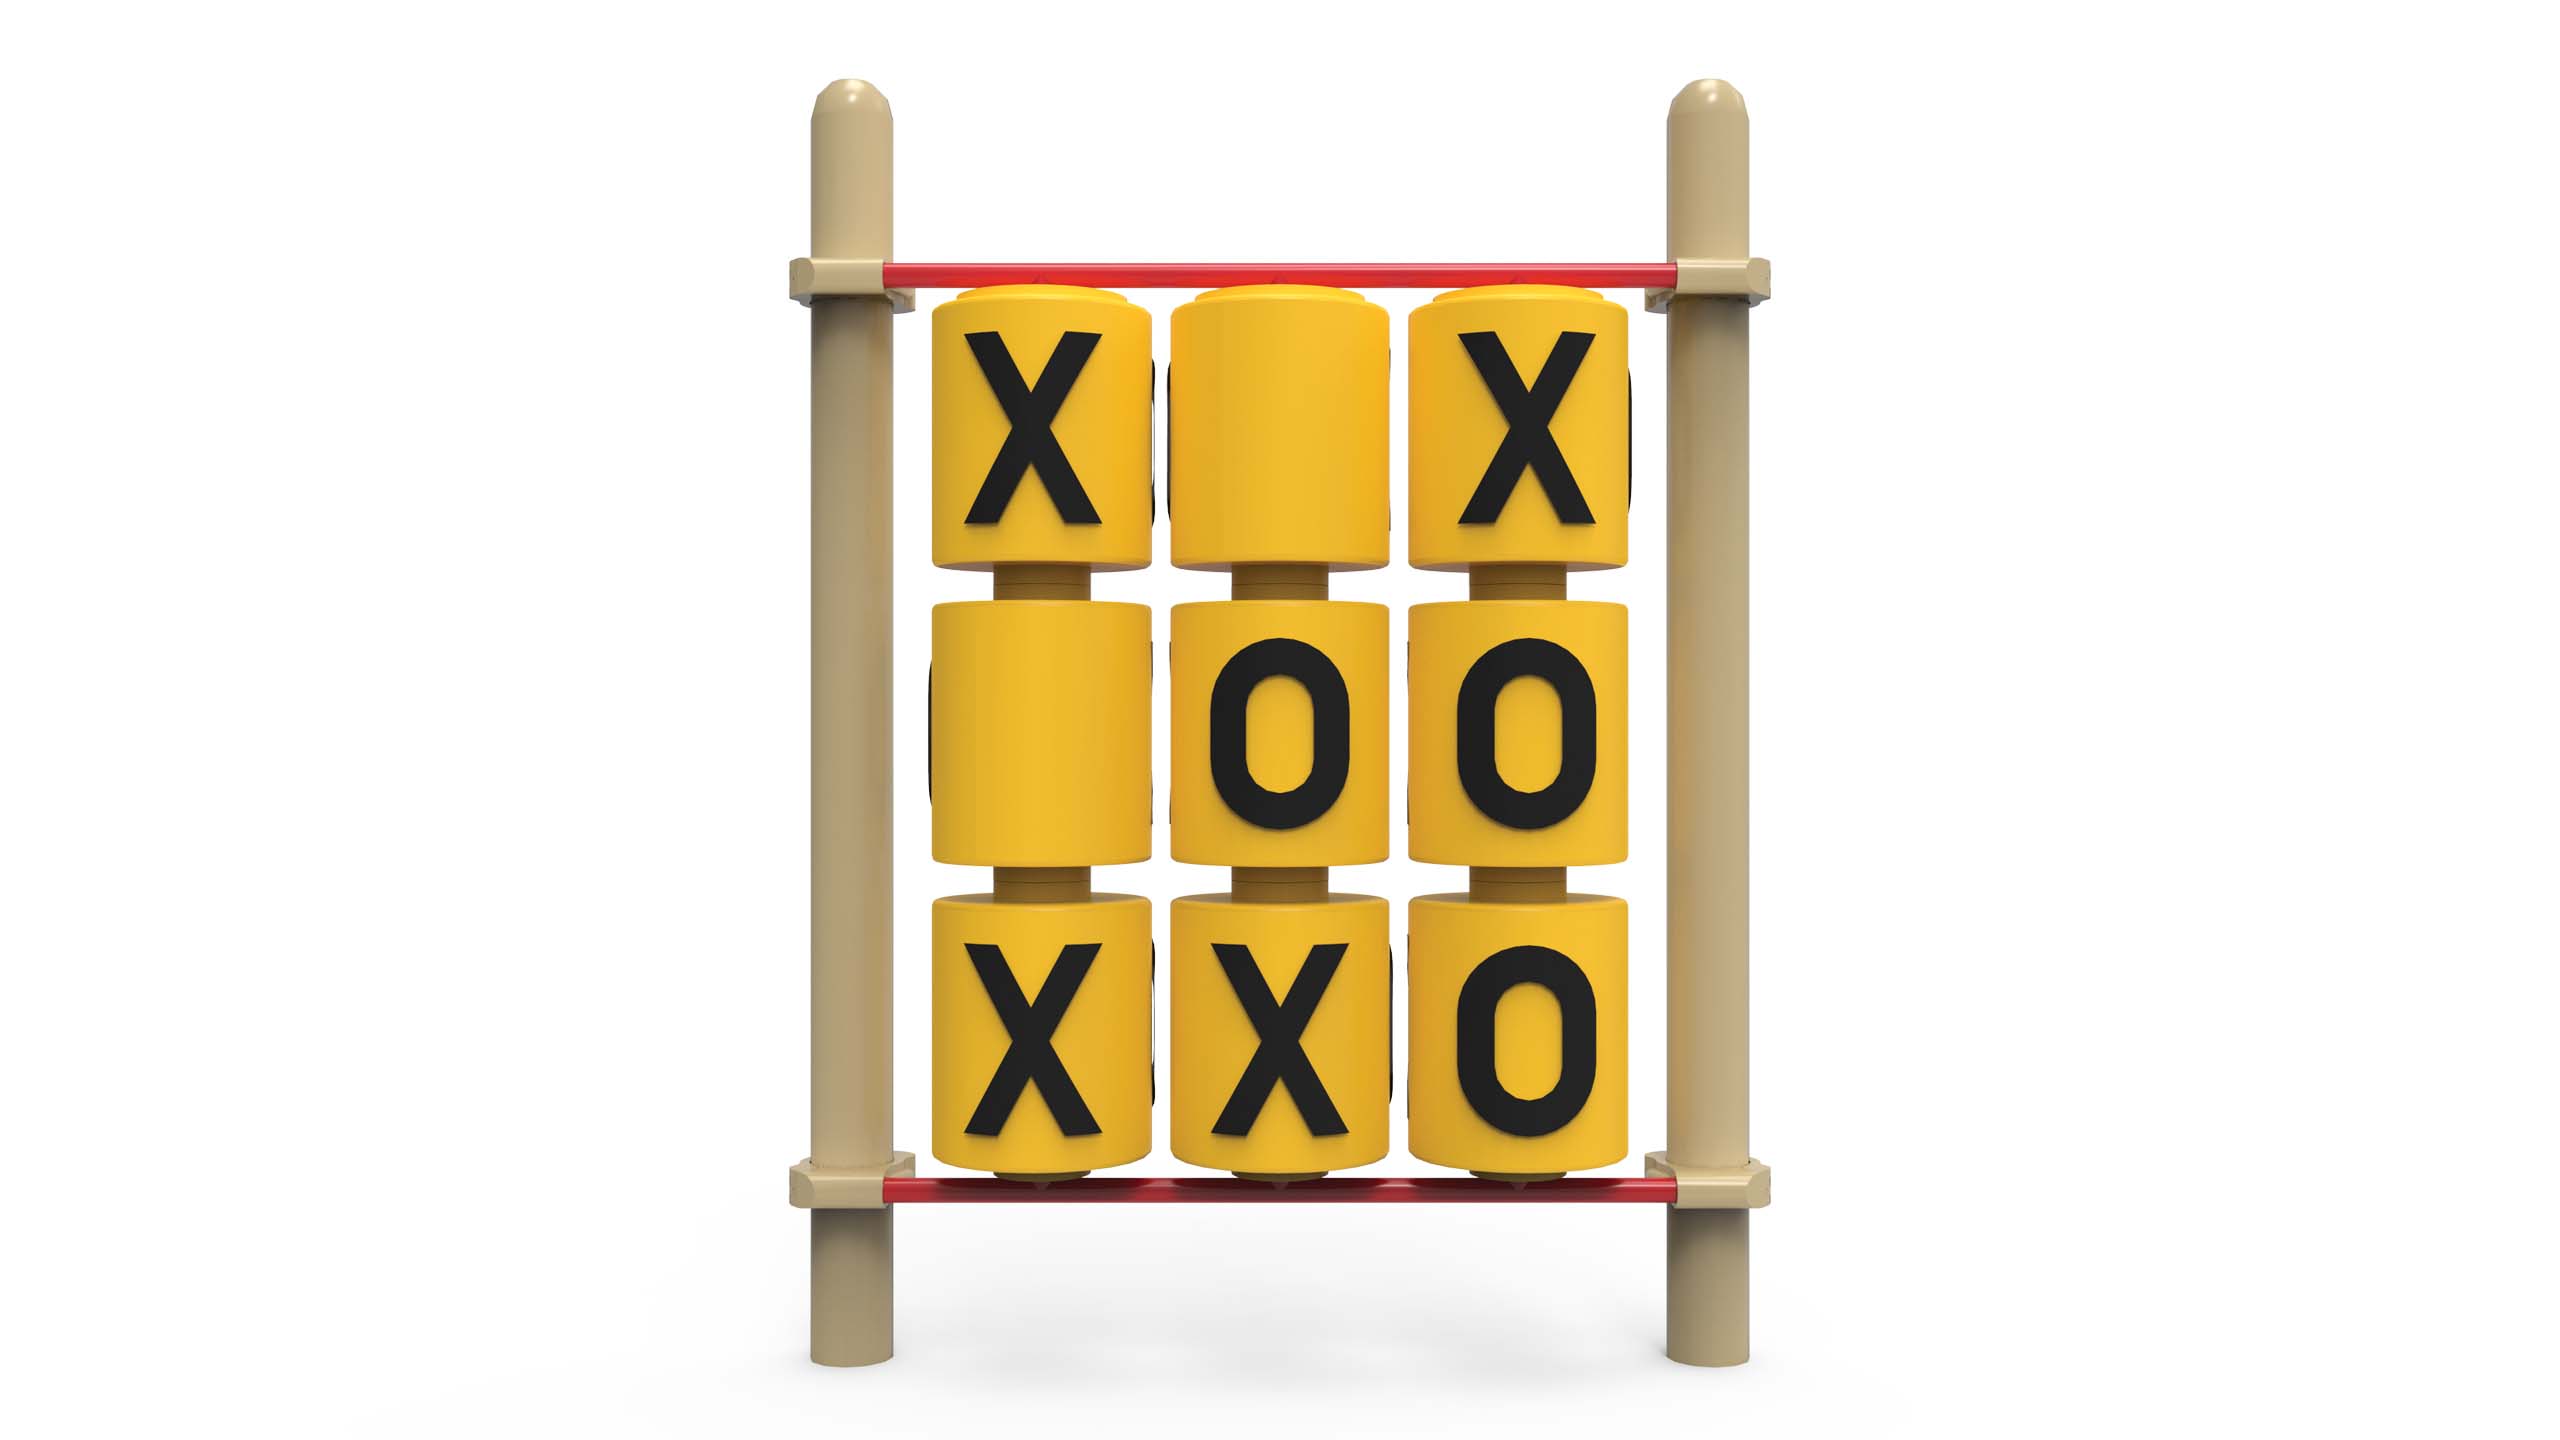 Play Tic-Tac-Toe Online - Mikes Research and Development